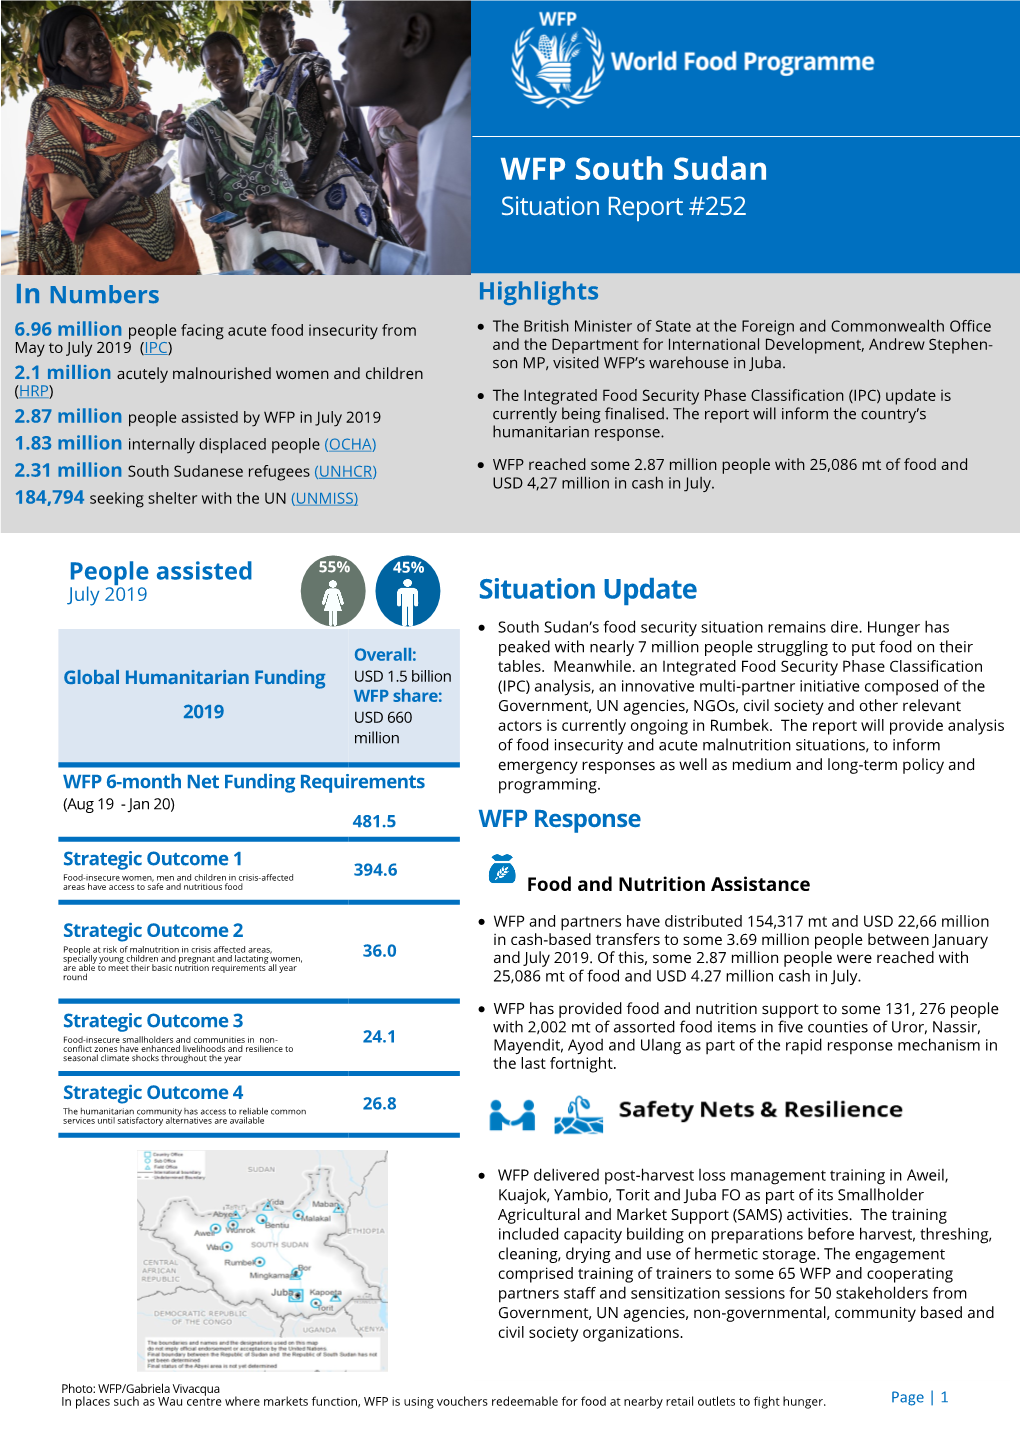 WFP South Sudan Situation Report #252